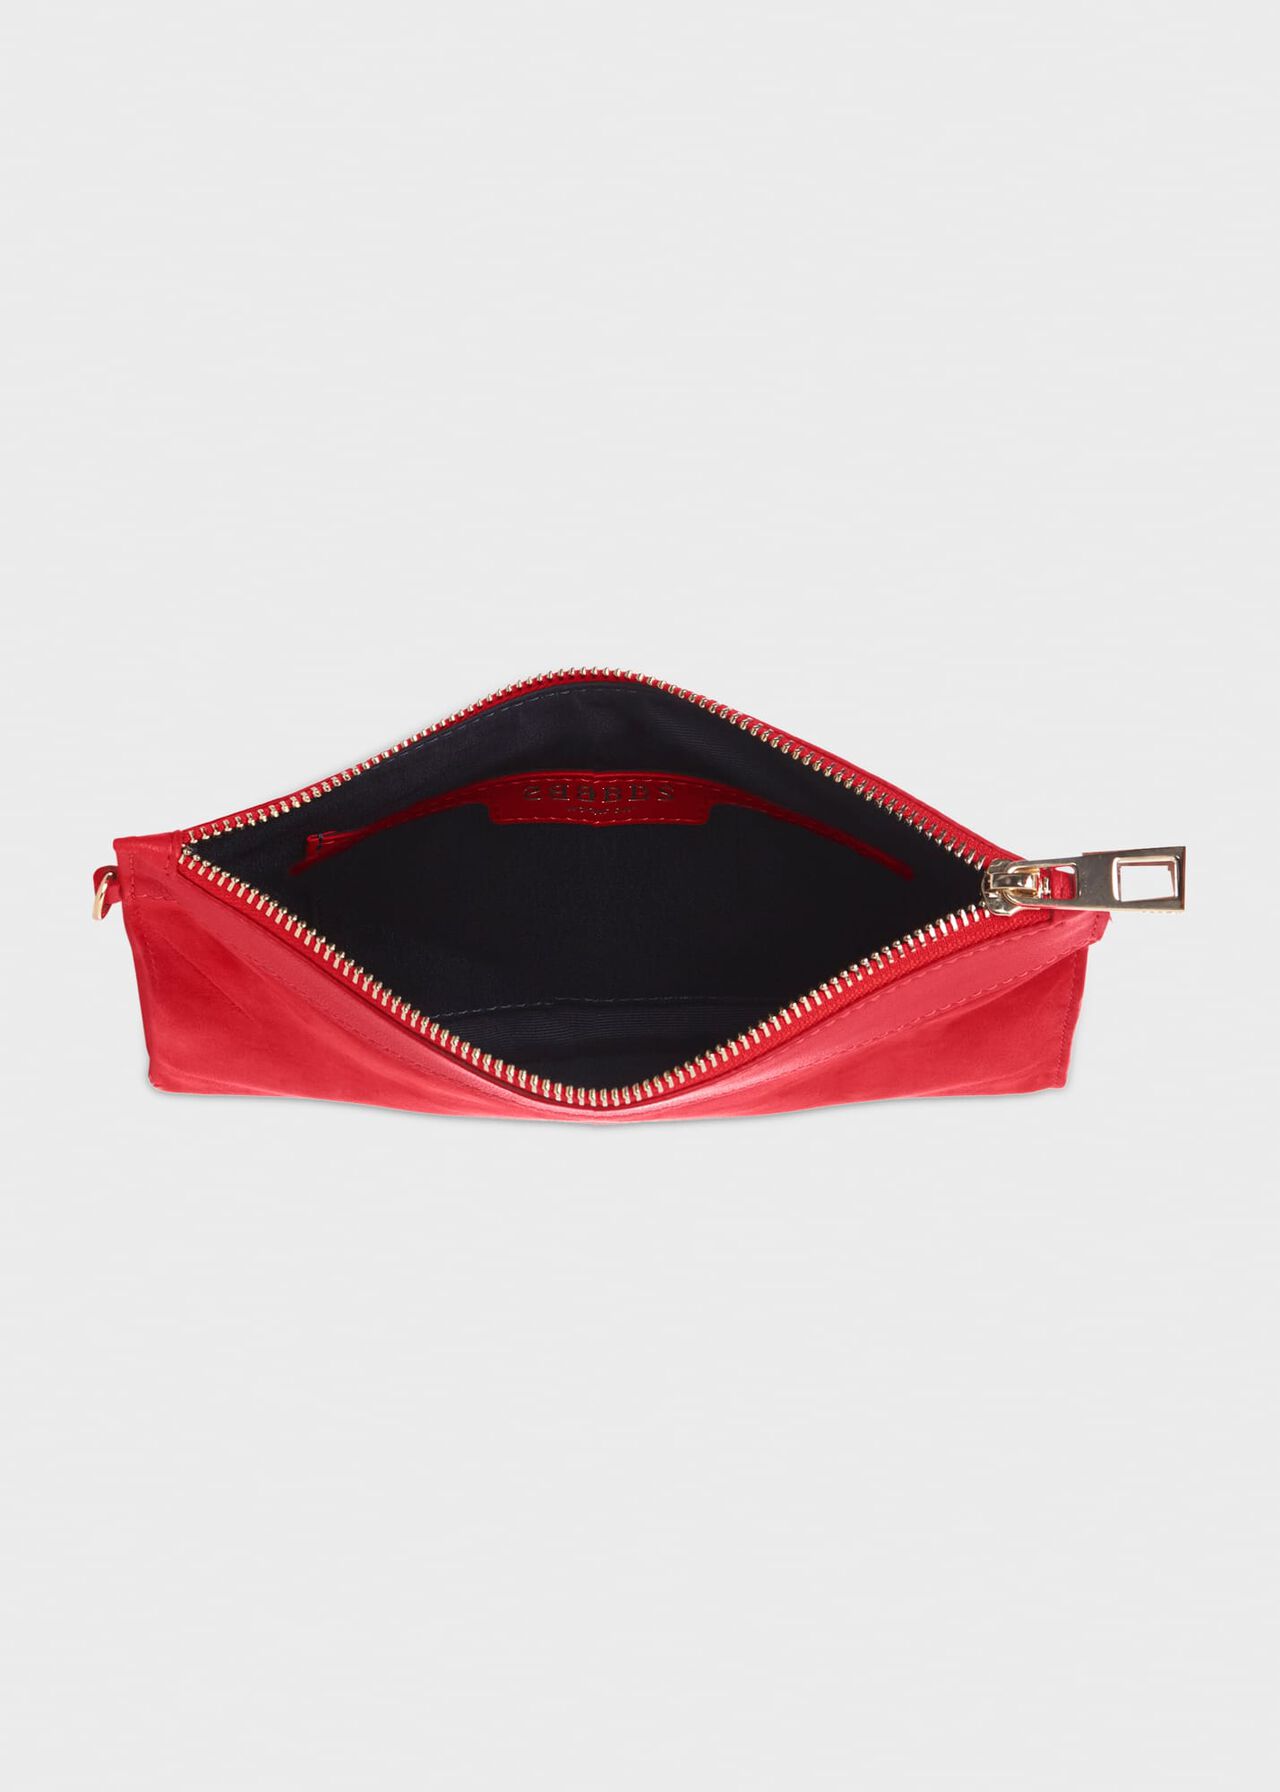 Lundy Wristlet, Wildflower Red, hi-res